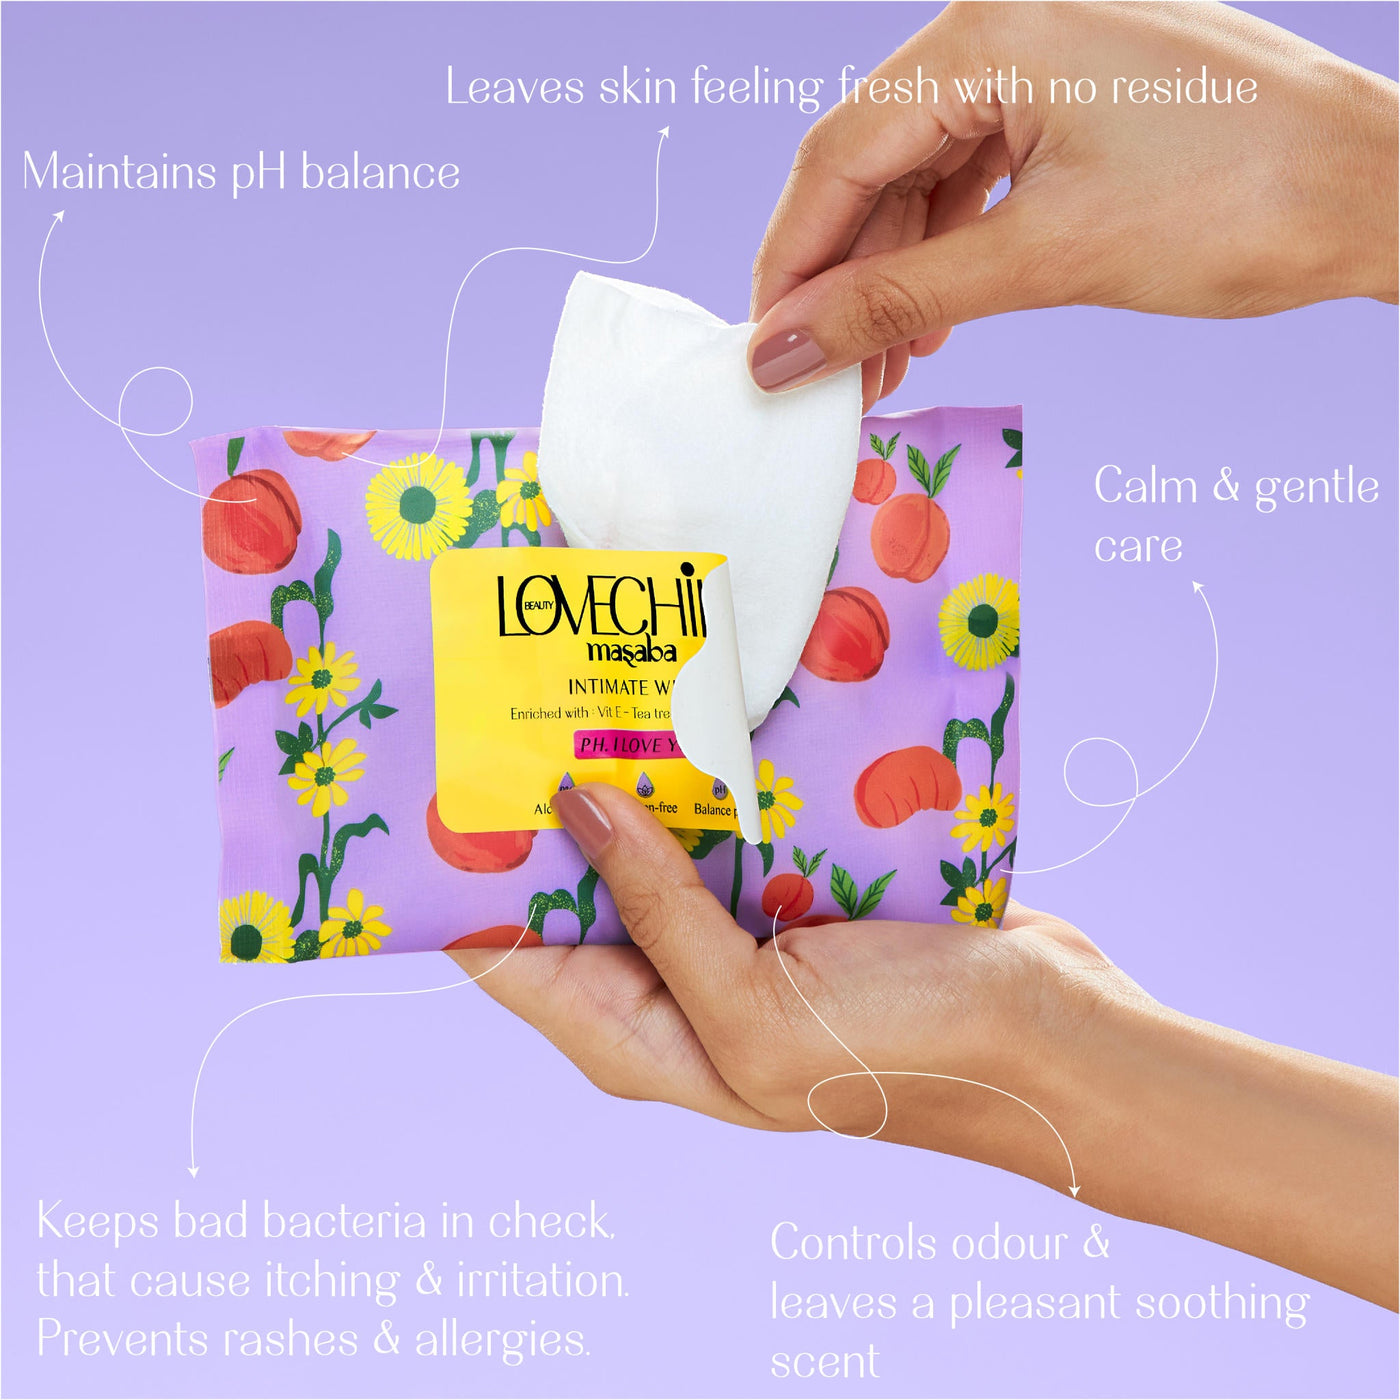 pH I Love You! - Intimate Wipes